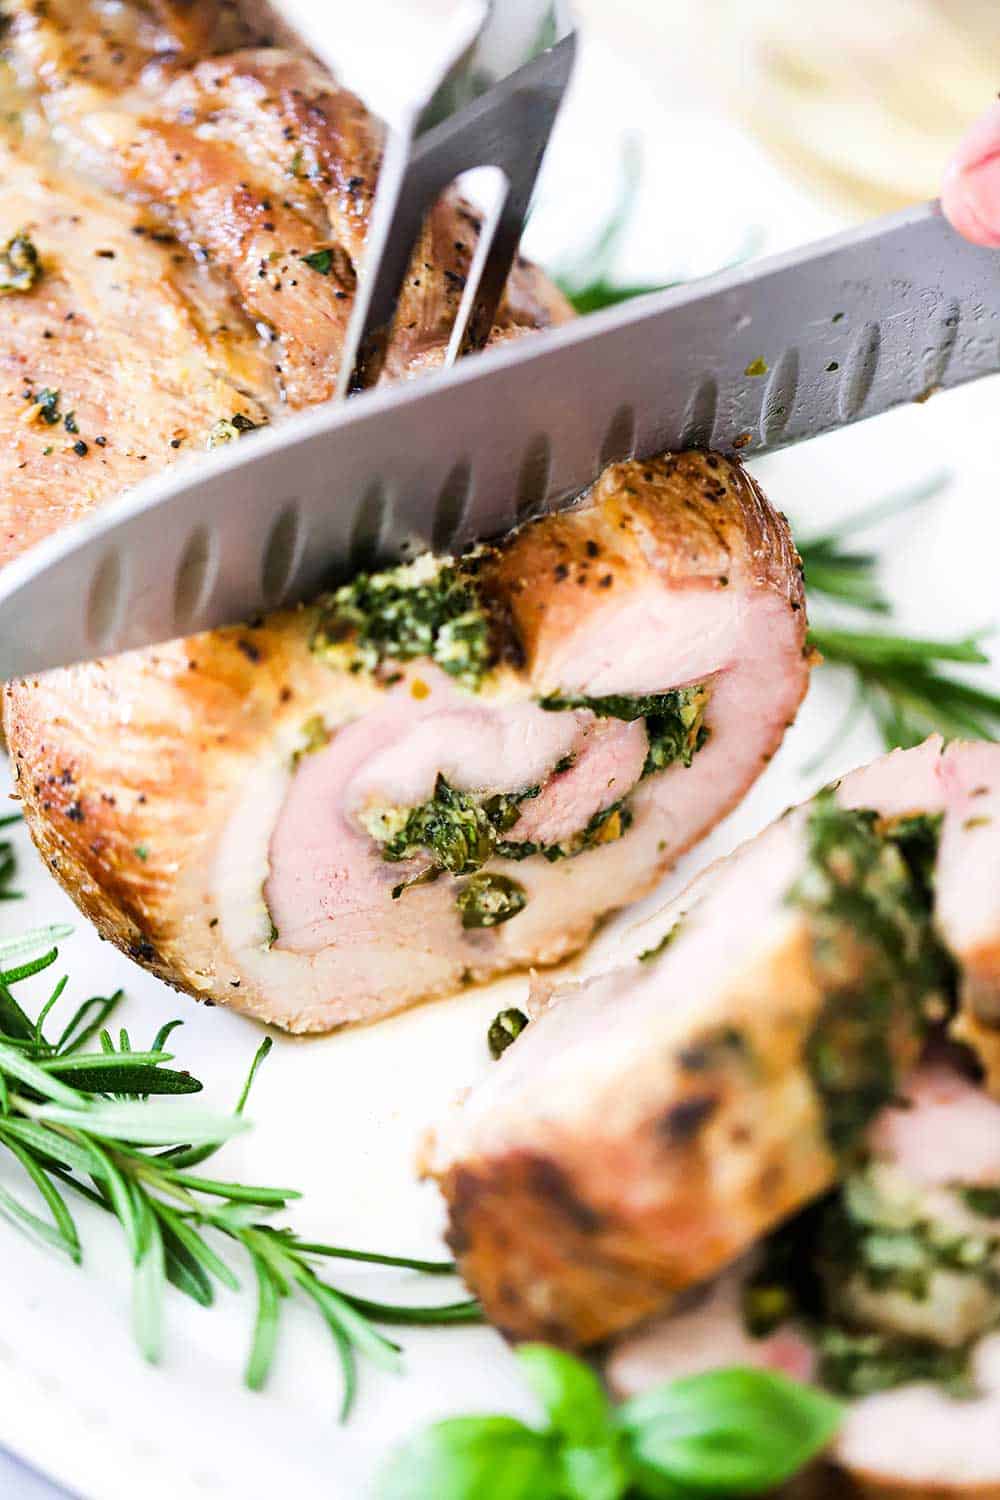 A chef's knife cutting into a herb-stuffed pork loin on a white platter.